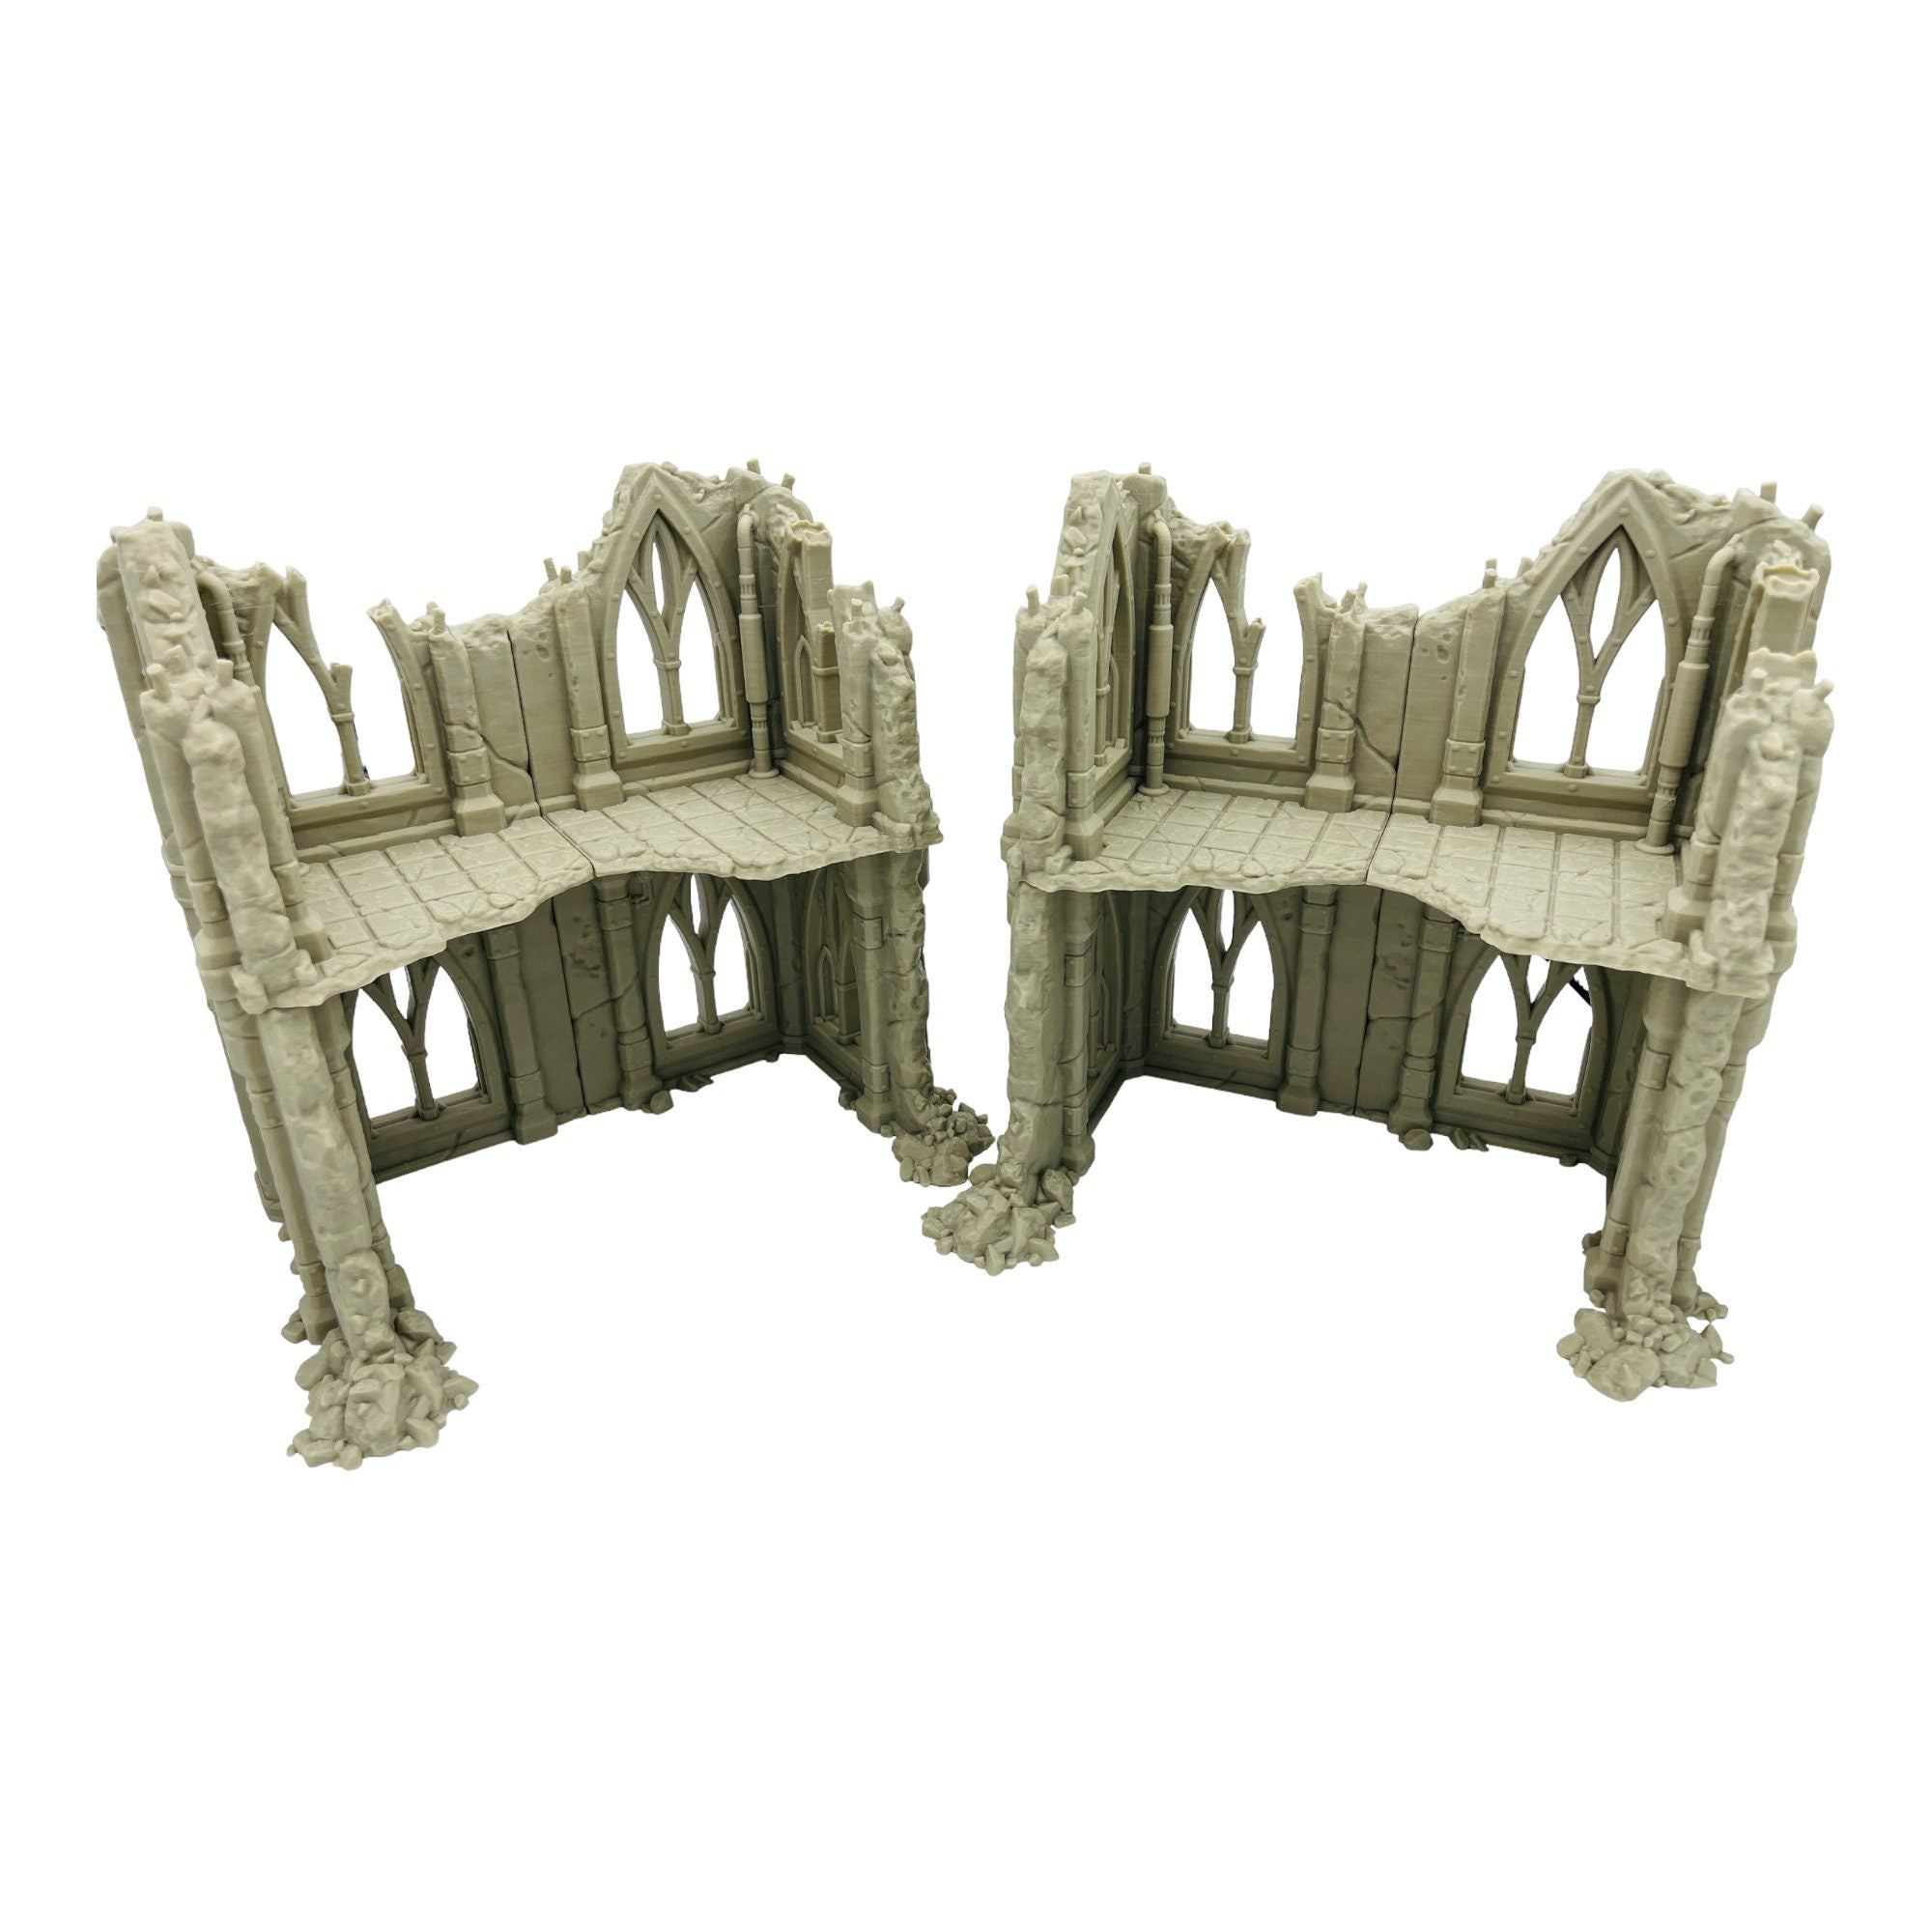 Ruined Structure 1 - Ruins of the Empire / Forbidden Prints / RPG and Wargame 3d Printed Tabletop Terrain / Licensed Printer